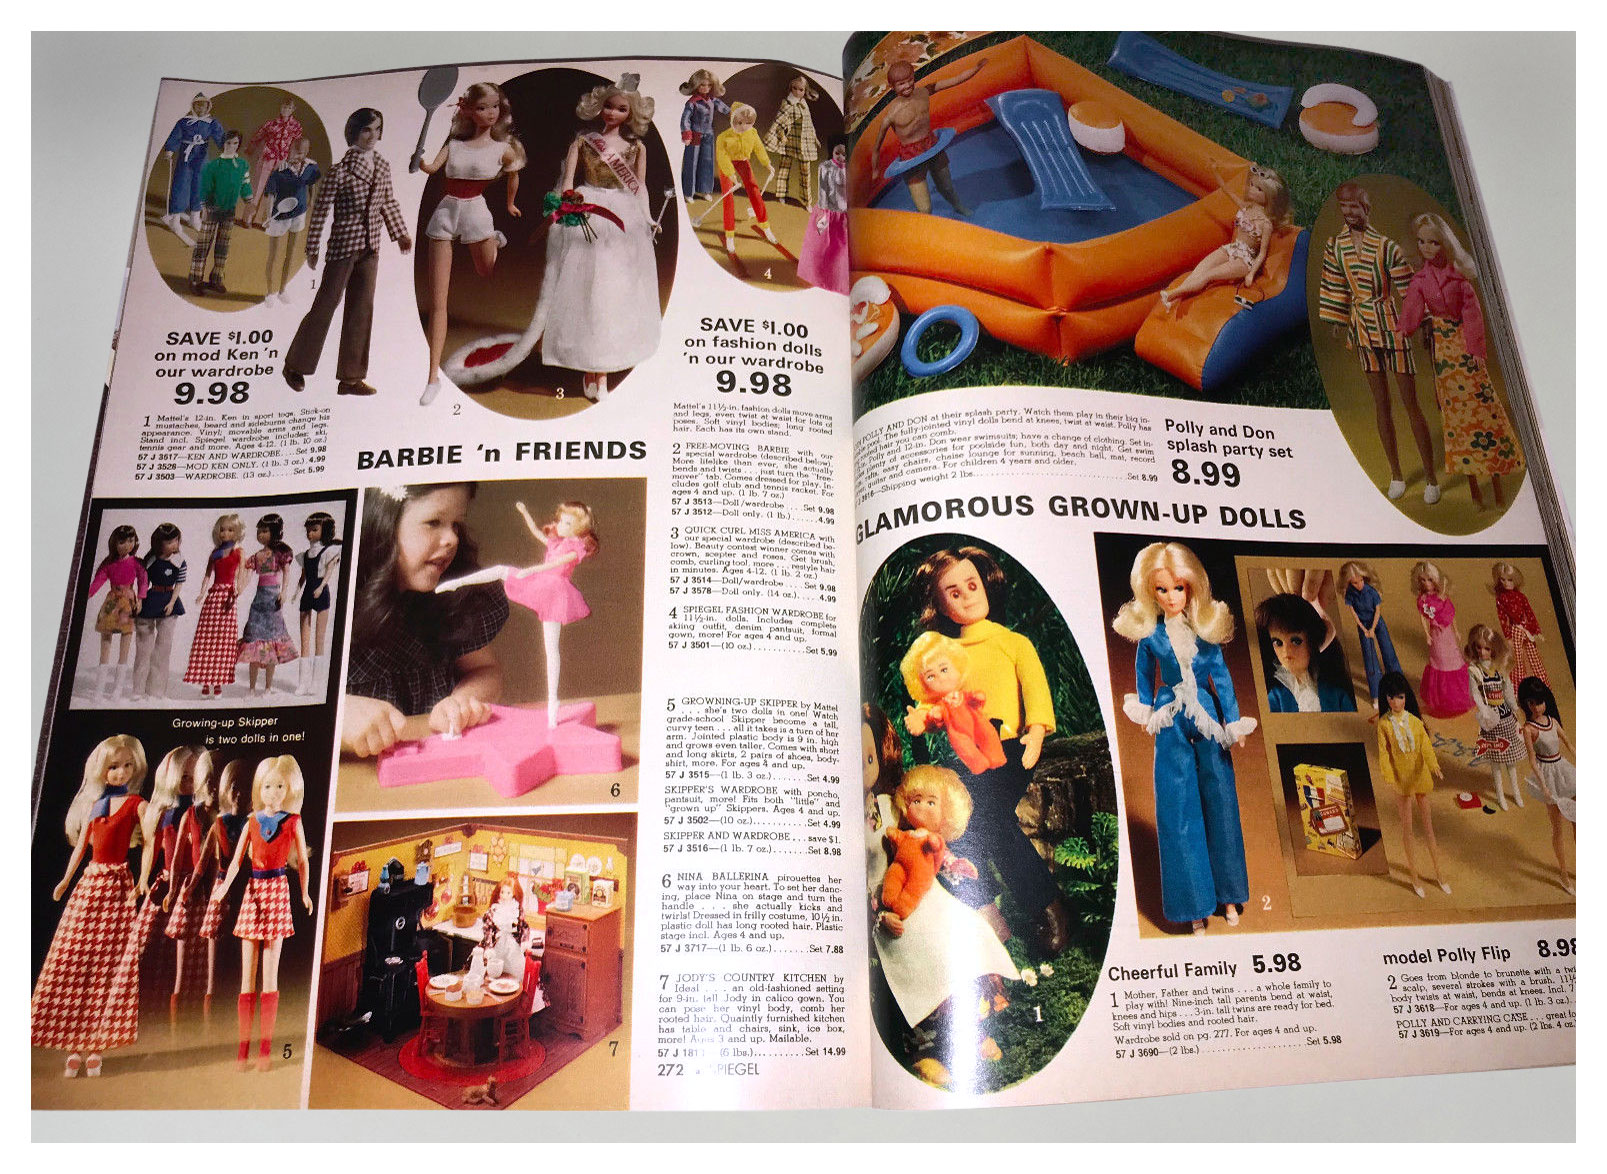 From 1975 Spiegel Christmas catalogue